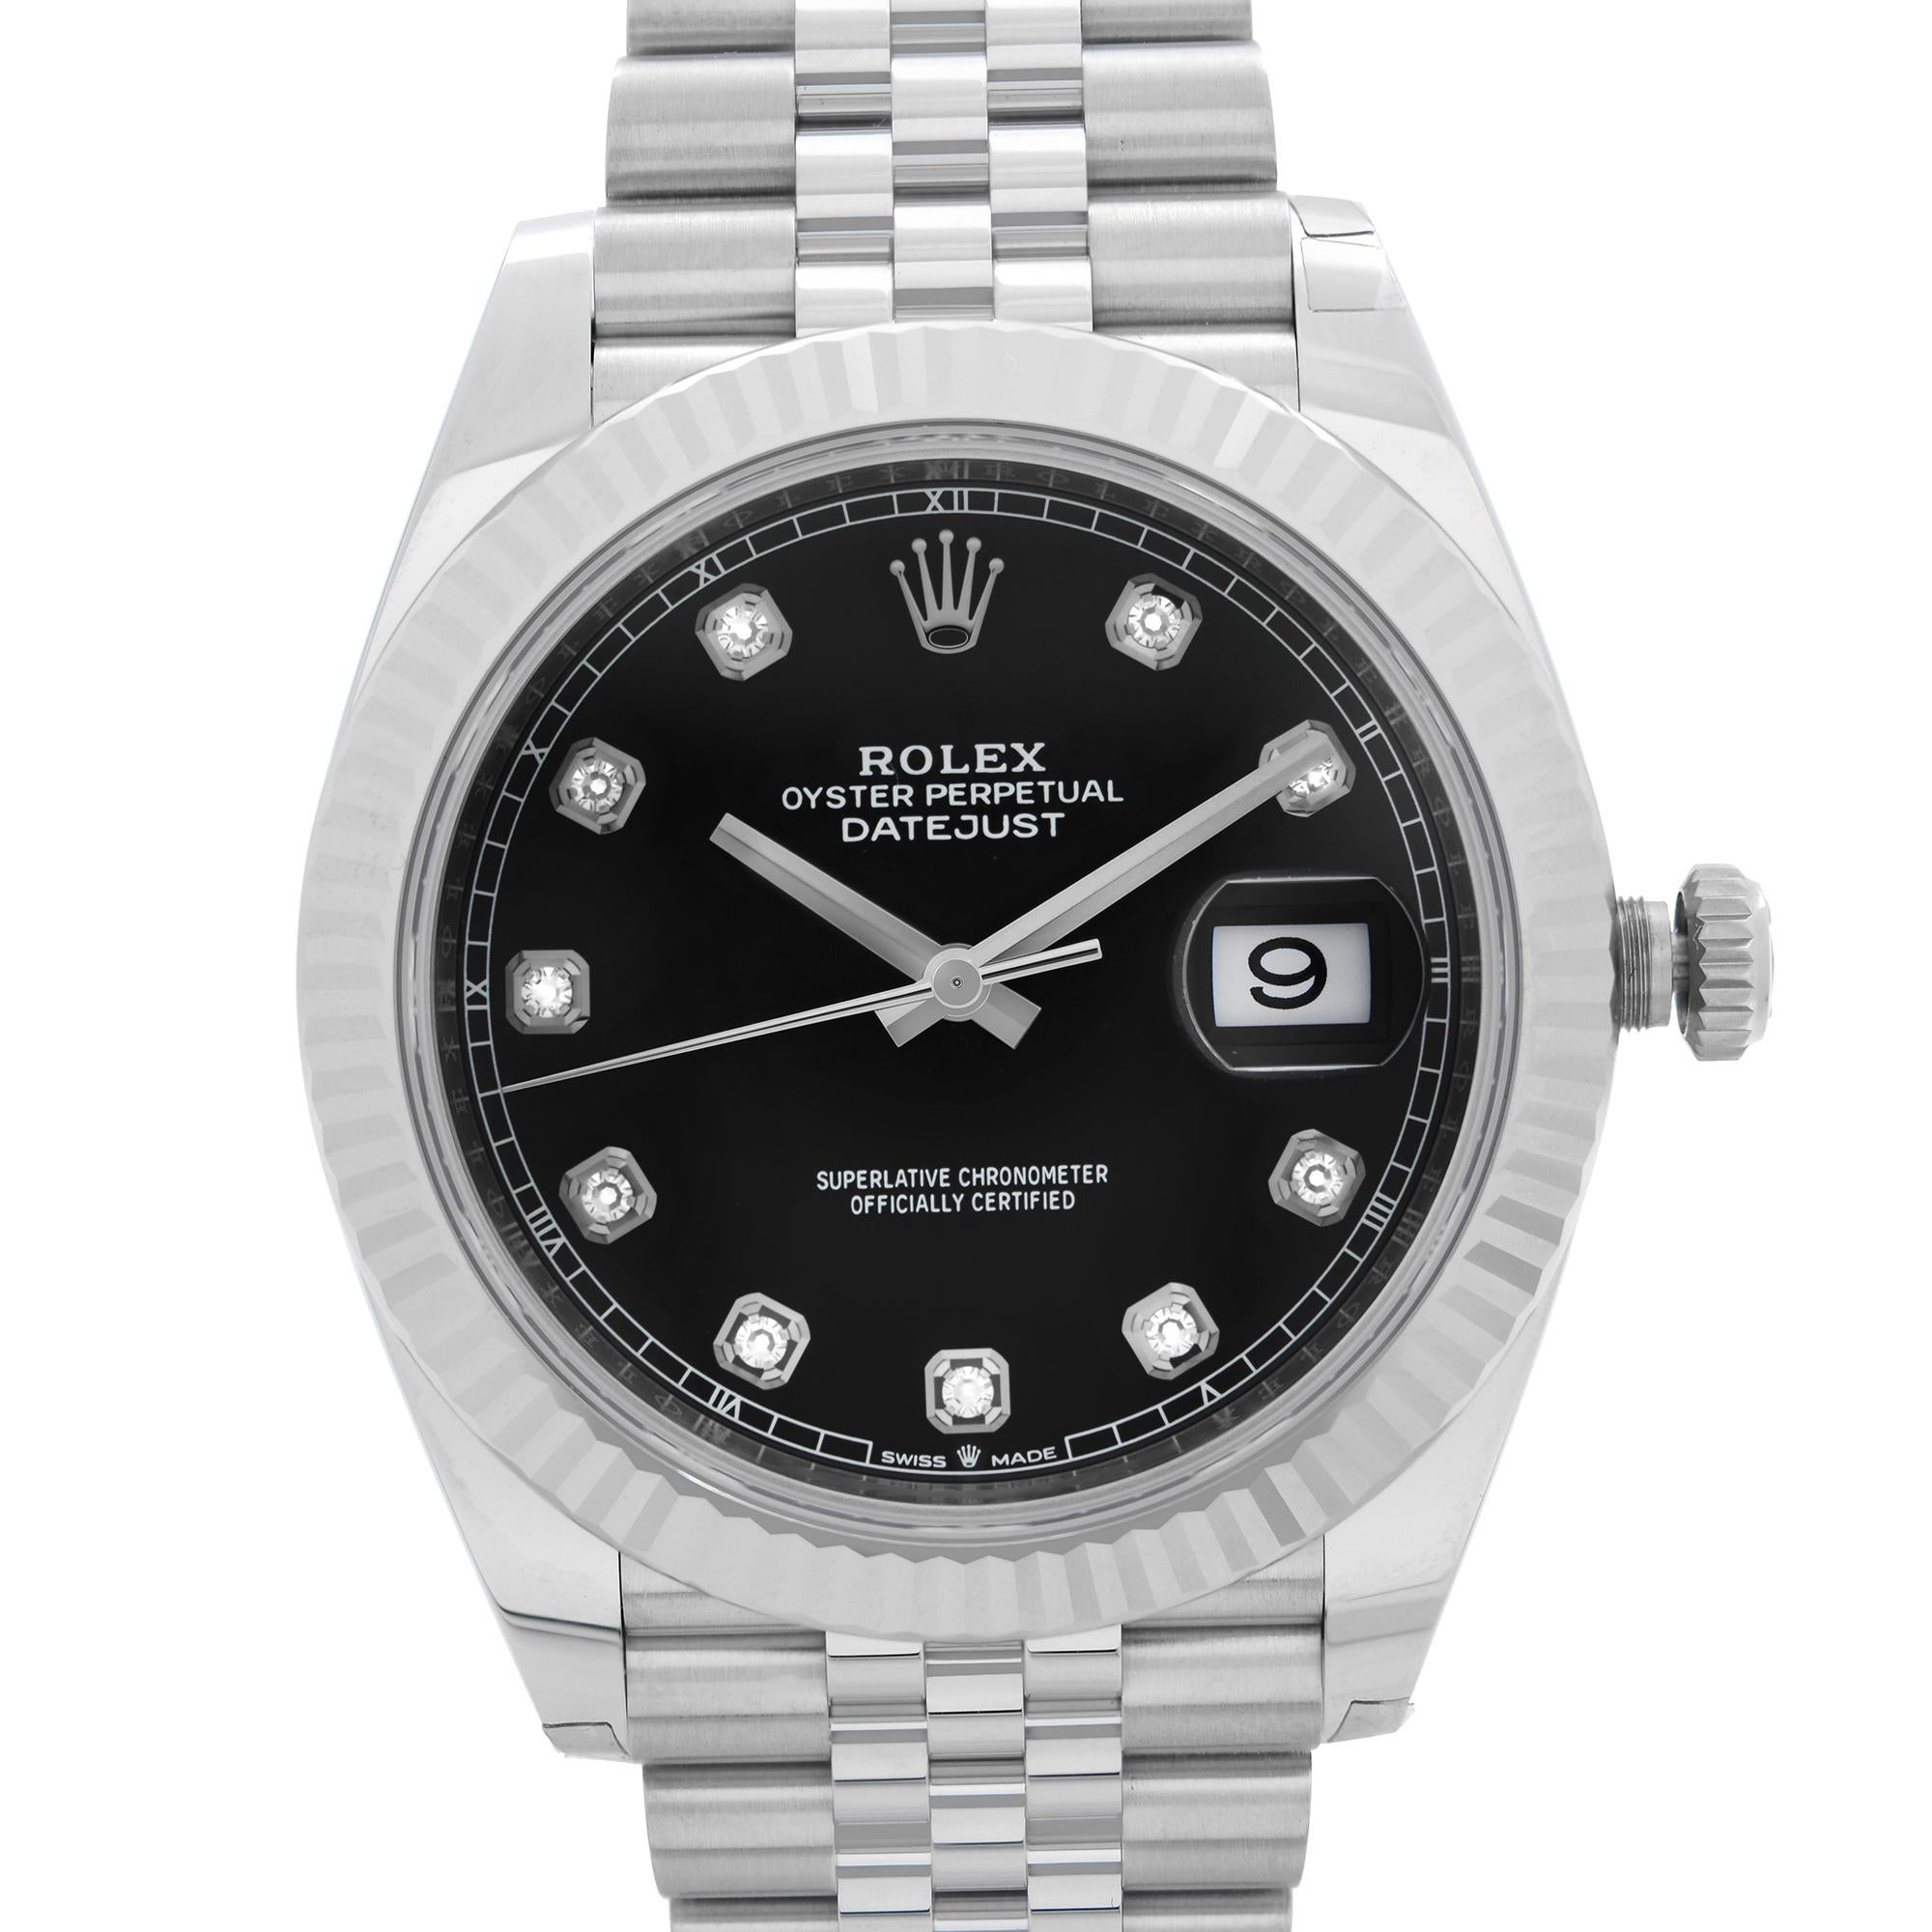 Brand New Fully stickers 2020  New Style card. Model Rolex Datejust 41 Jubilee Steel Black Diamond Dial Automatic Men's Watch 126334. The timepiece is Fully Stickered and Comes with a 2020 Card. It is Powered by Mechanical (Automatic) Movement And